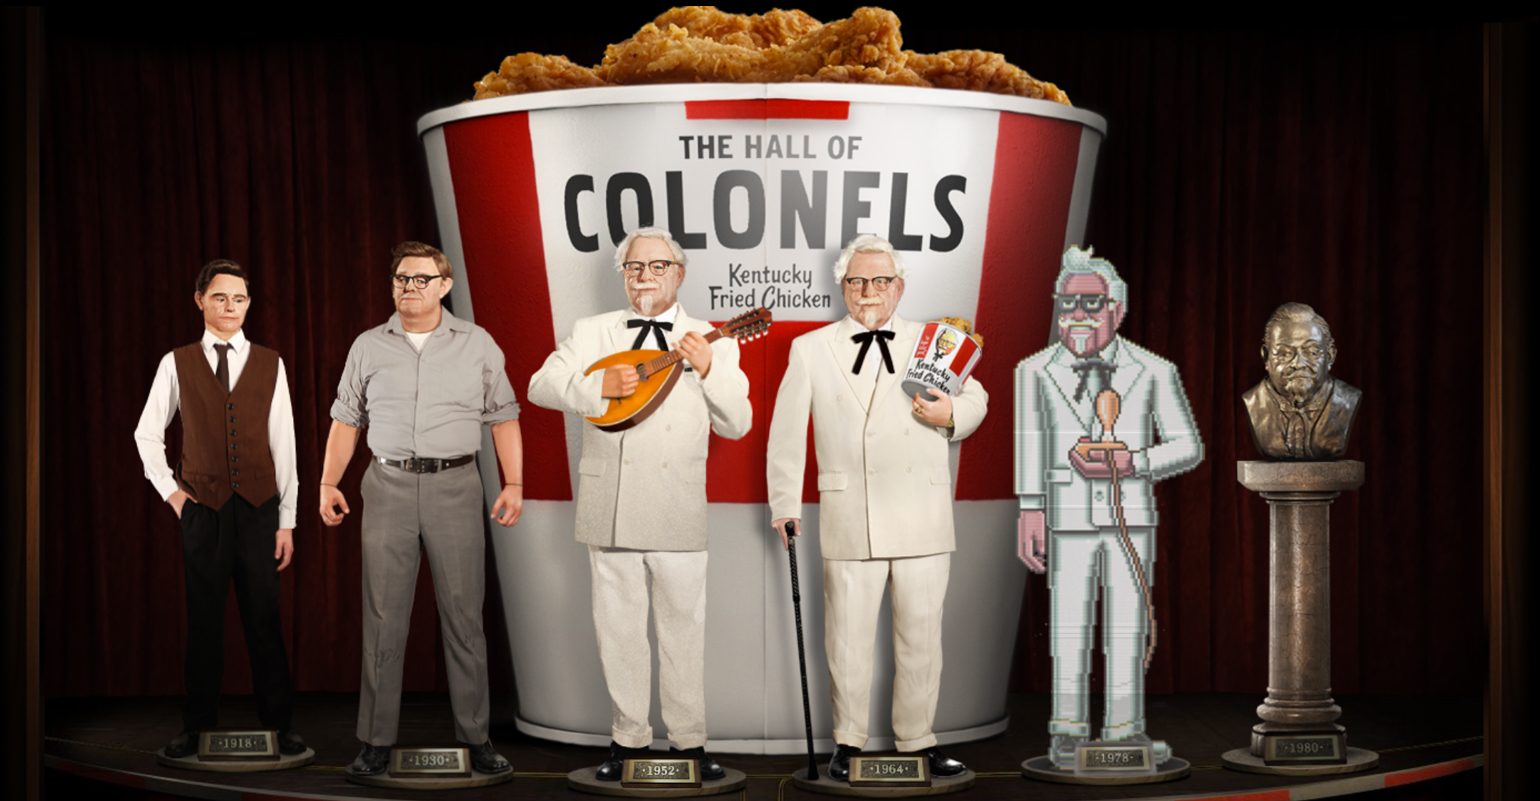 The re-colonelization of KFC